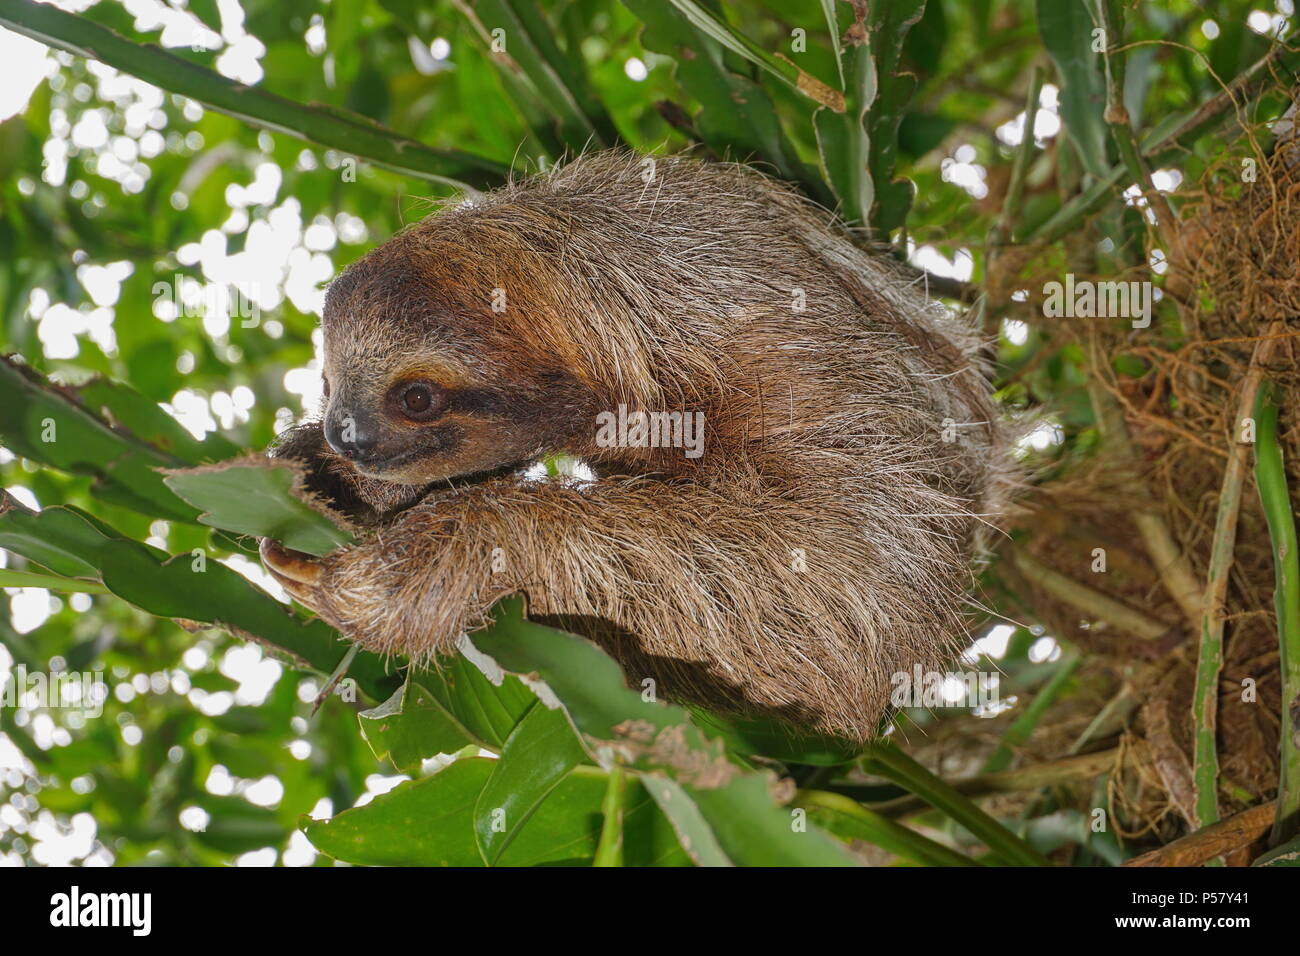 A three-toed sloth animal on a plant in the jungle of Costa Rica, Central America Stock Photo